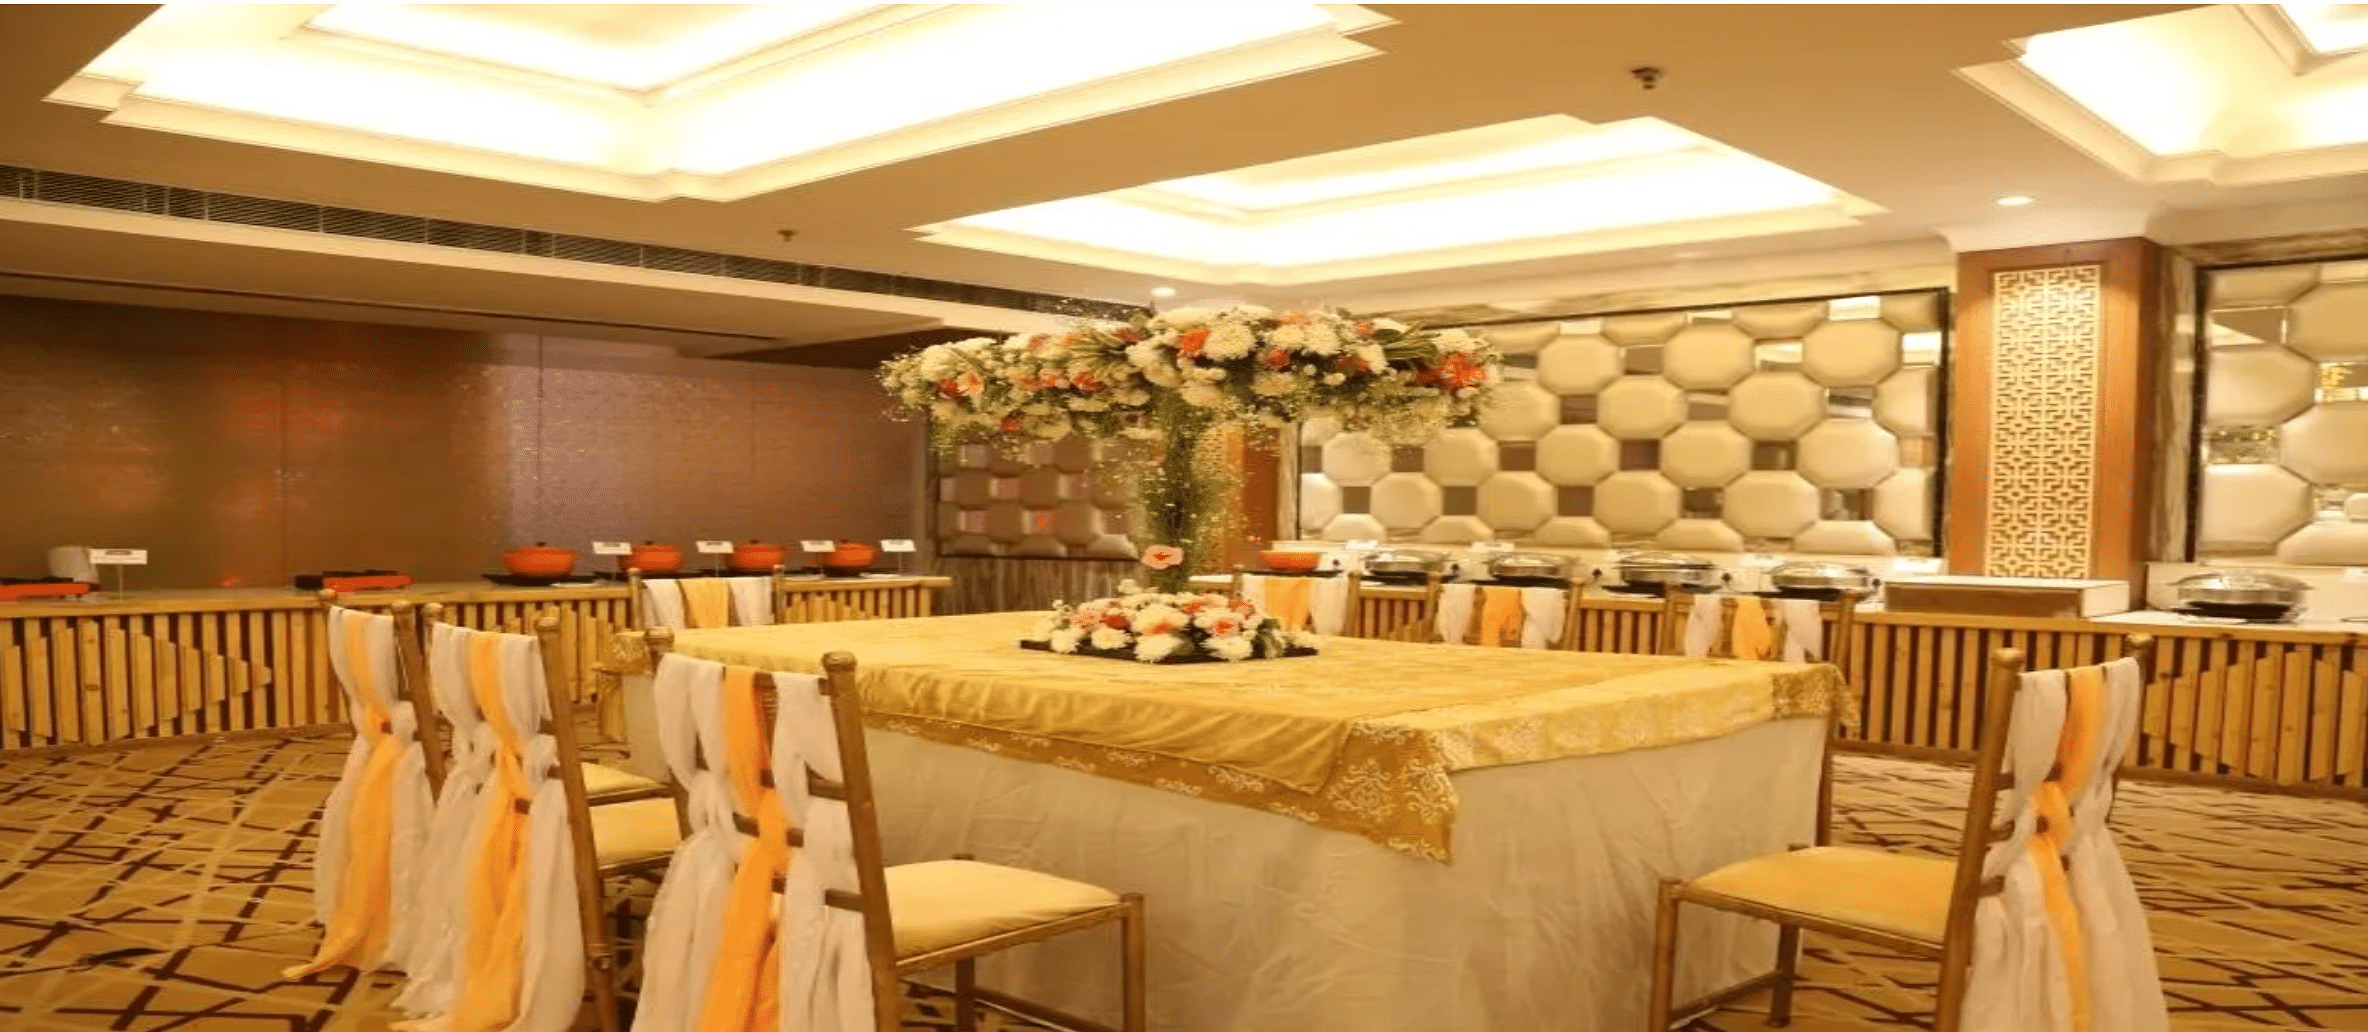 Dee Marks Hotel And Resorts in NH 8, Delhi